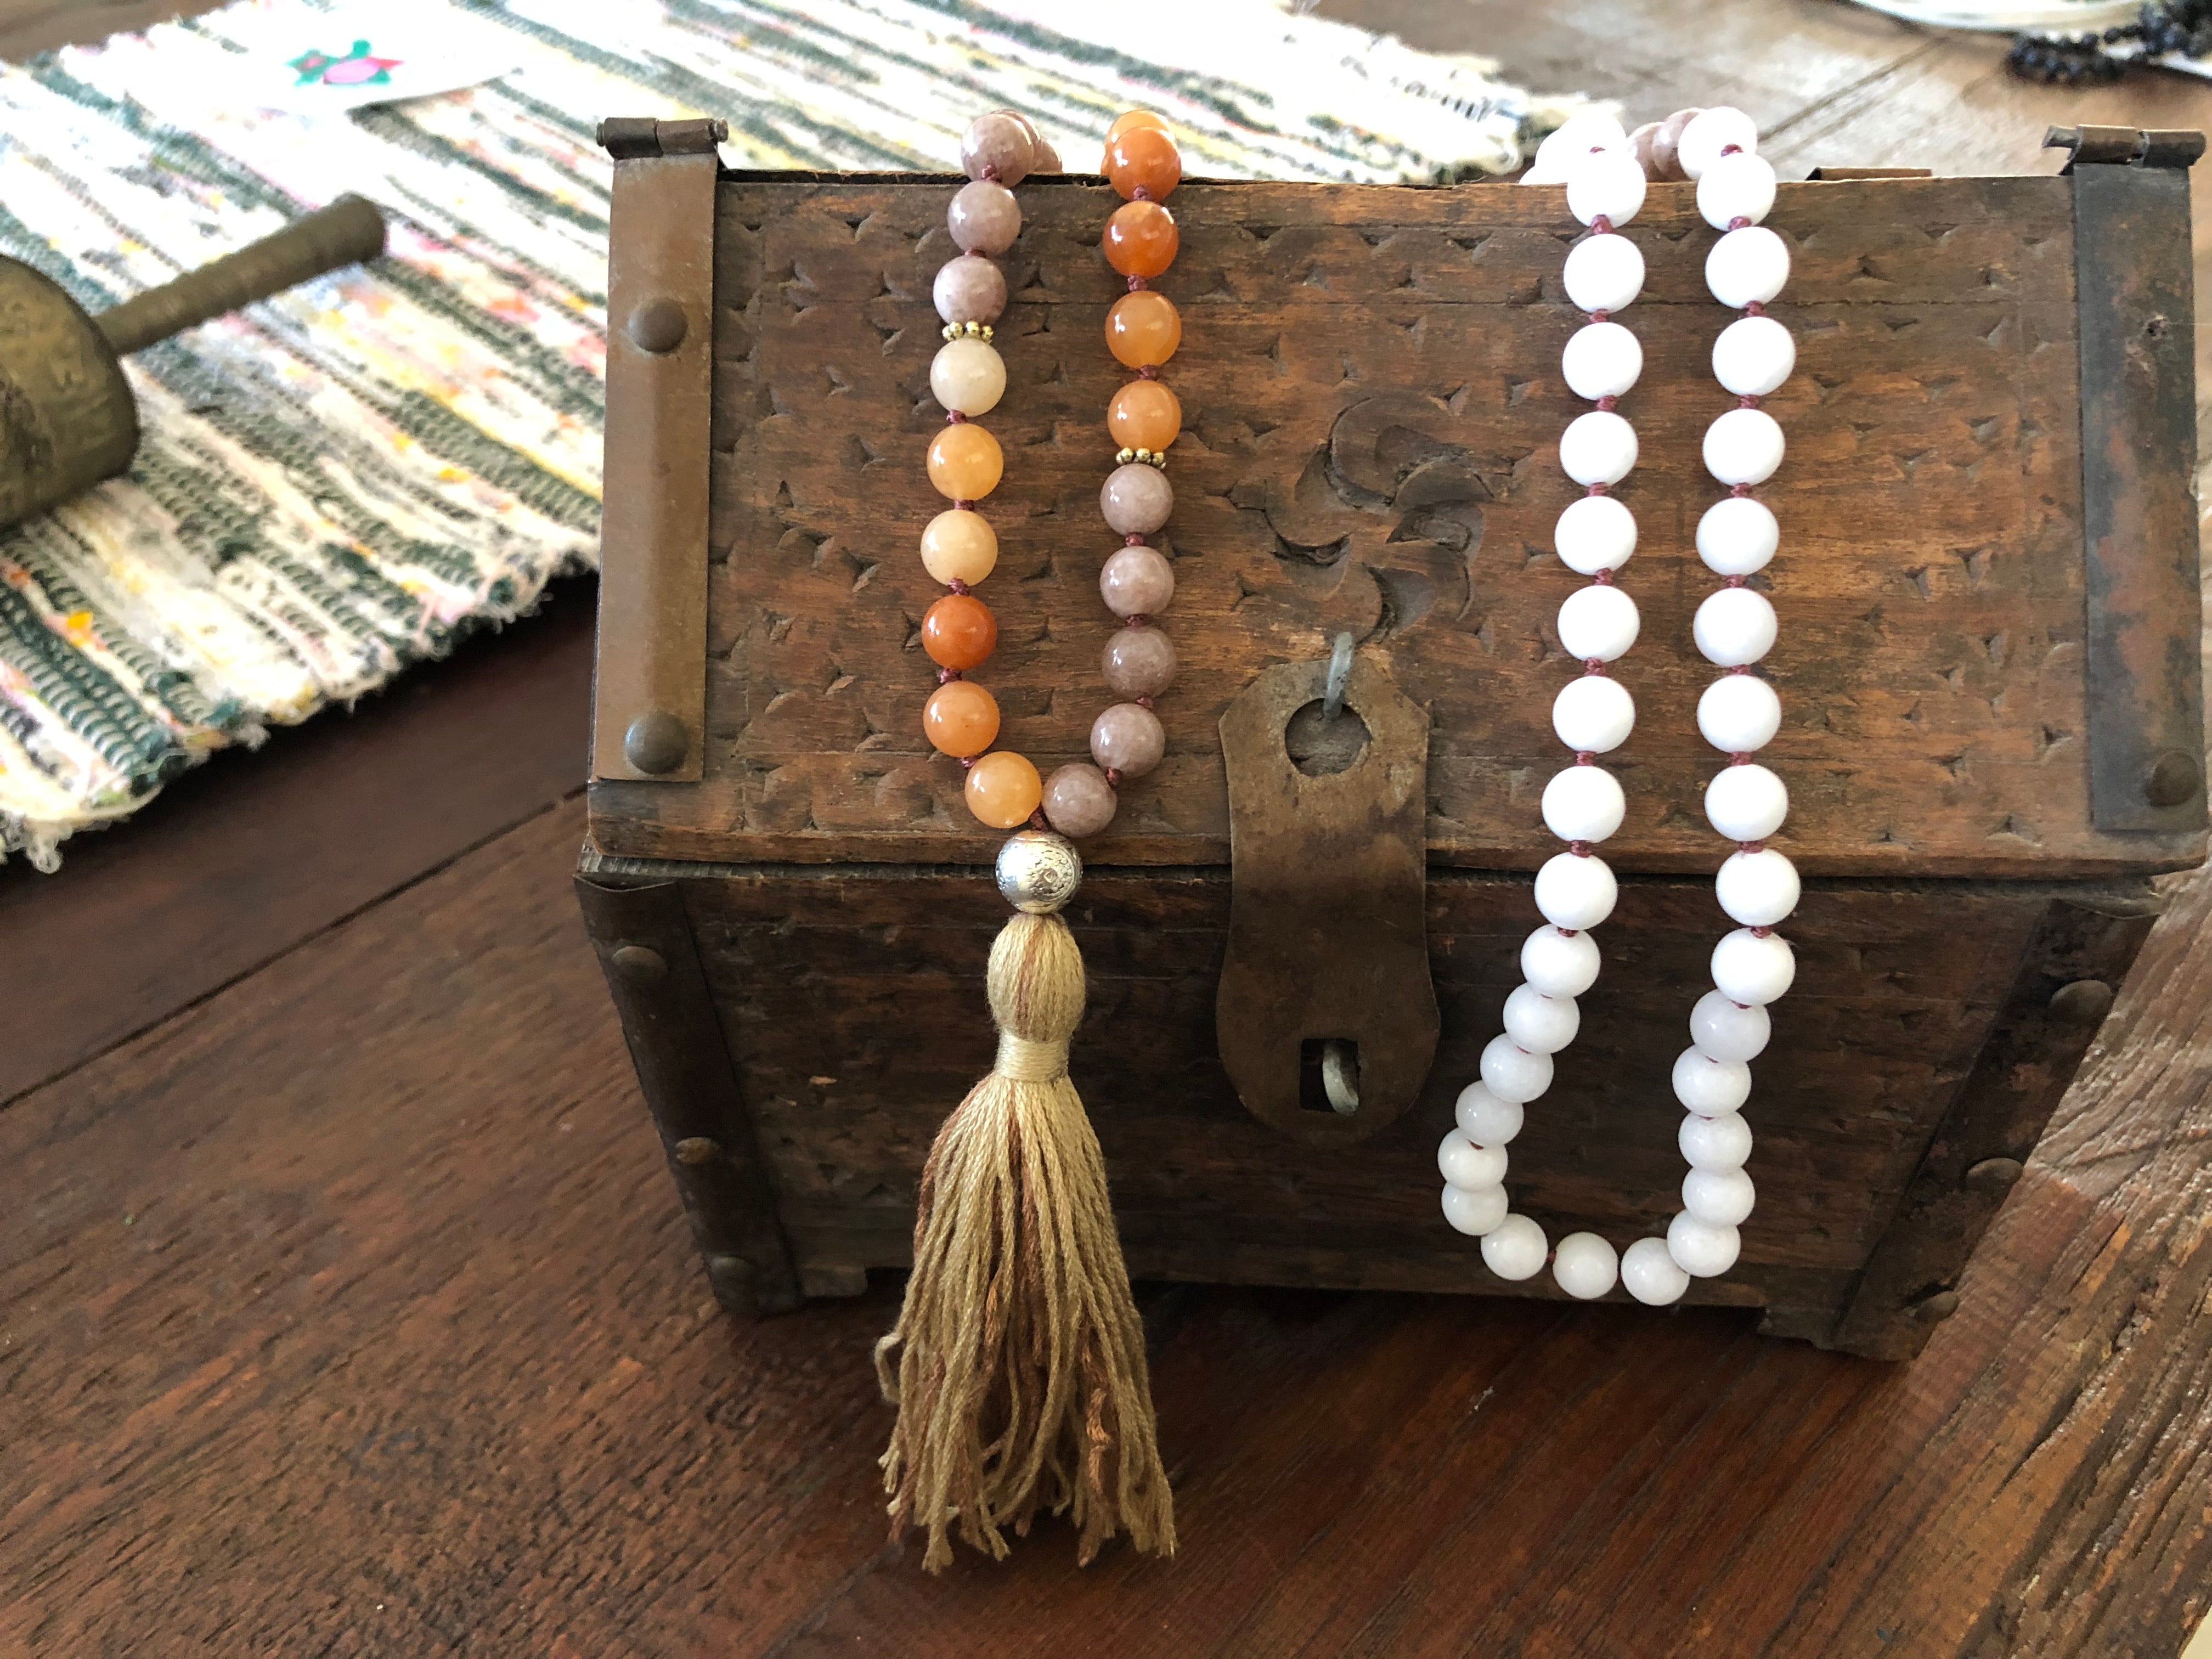 Agate Stone Necklace with Cotton Tassel